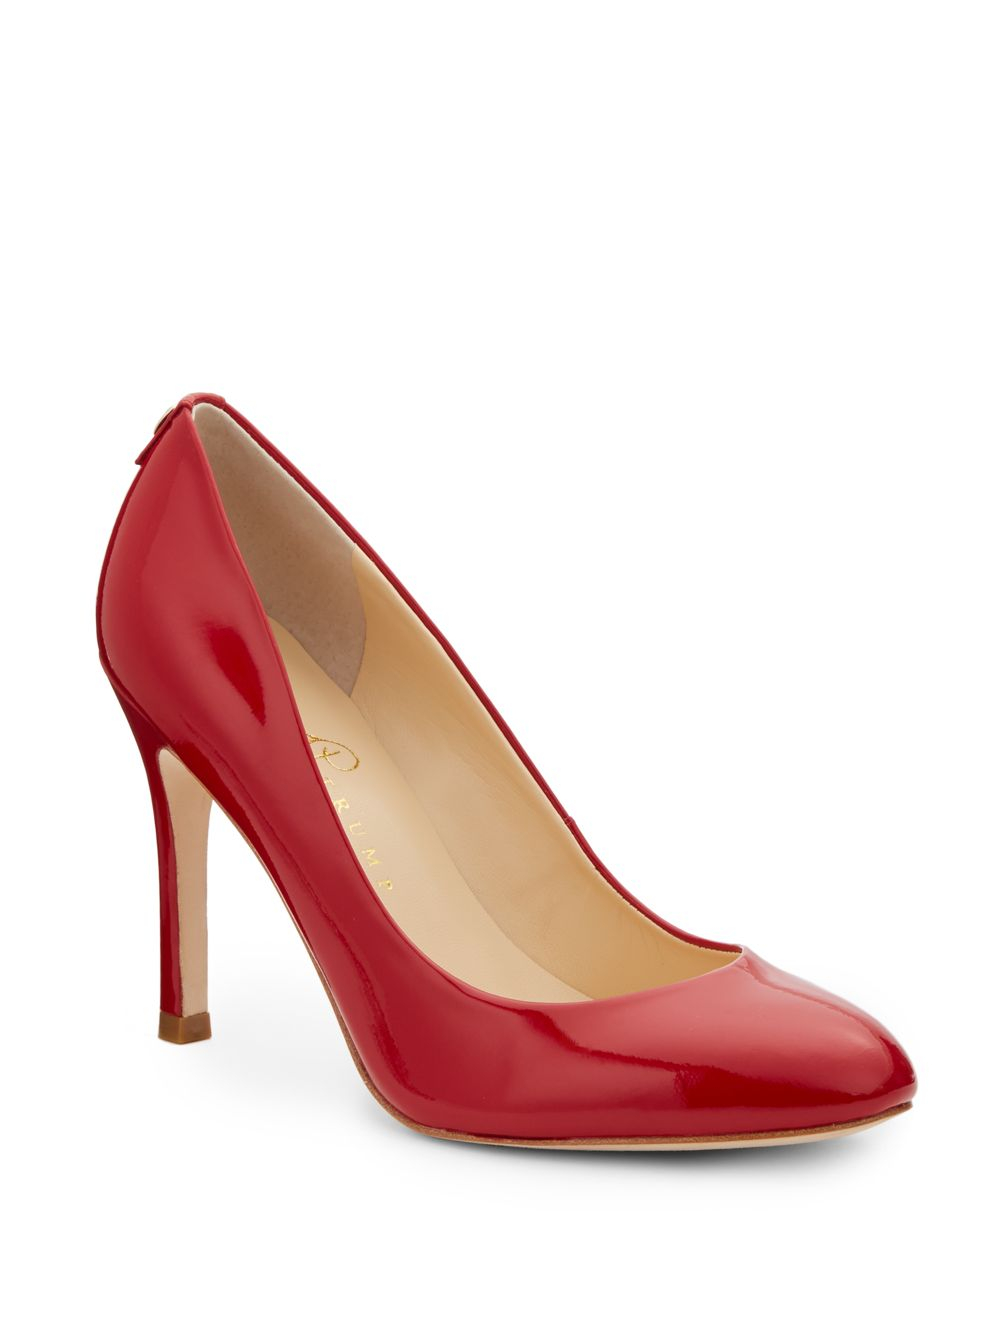 Lyst - Ivanka Trump Janie Patent Leather Pumps in Red